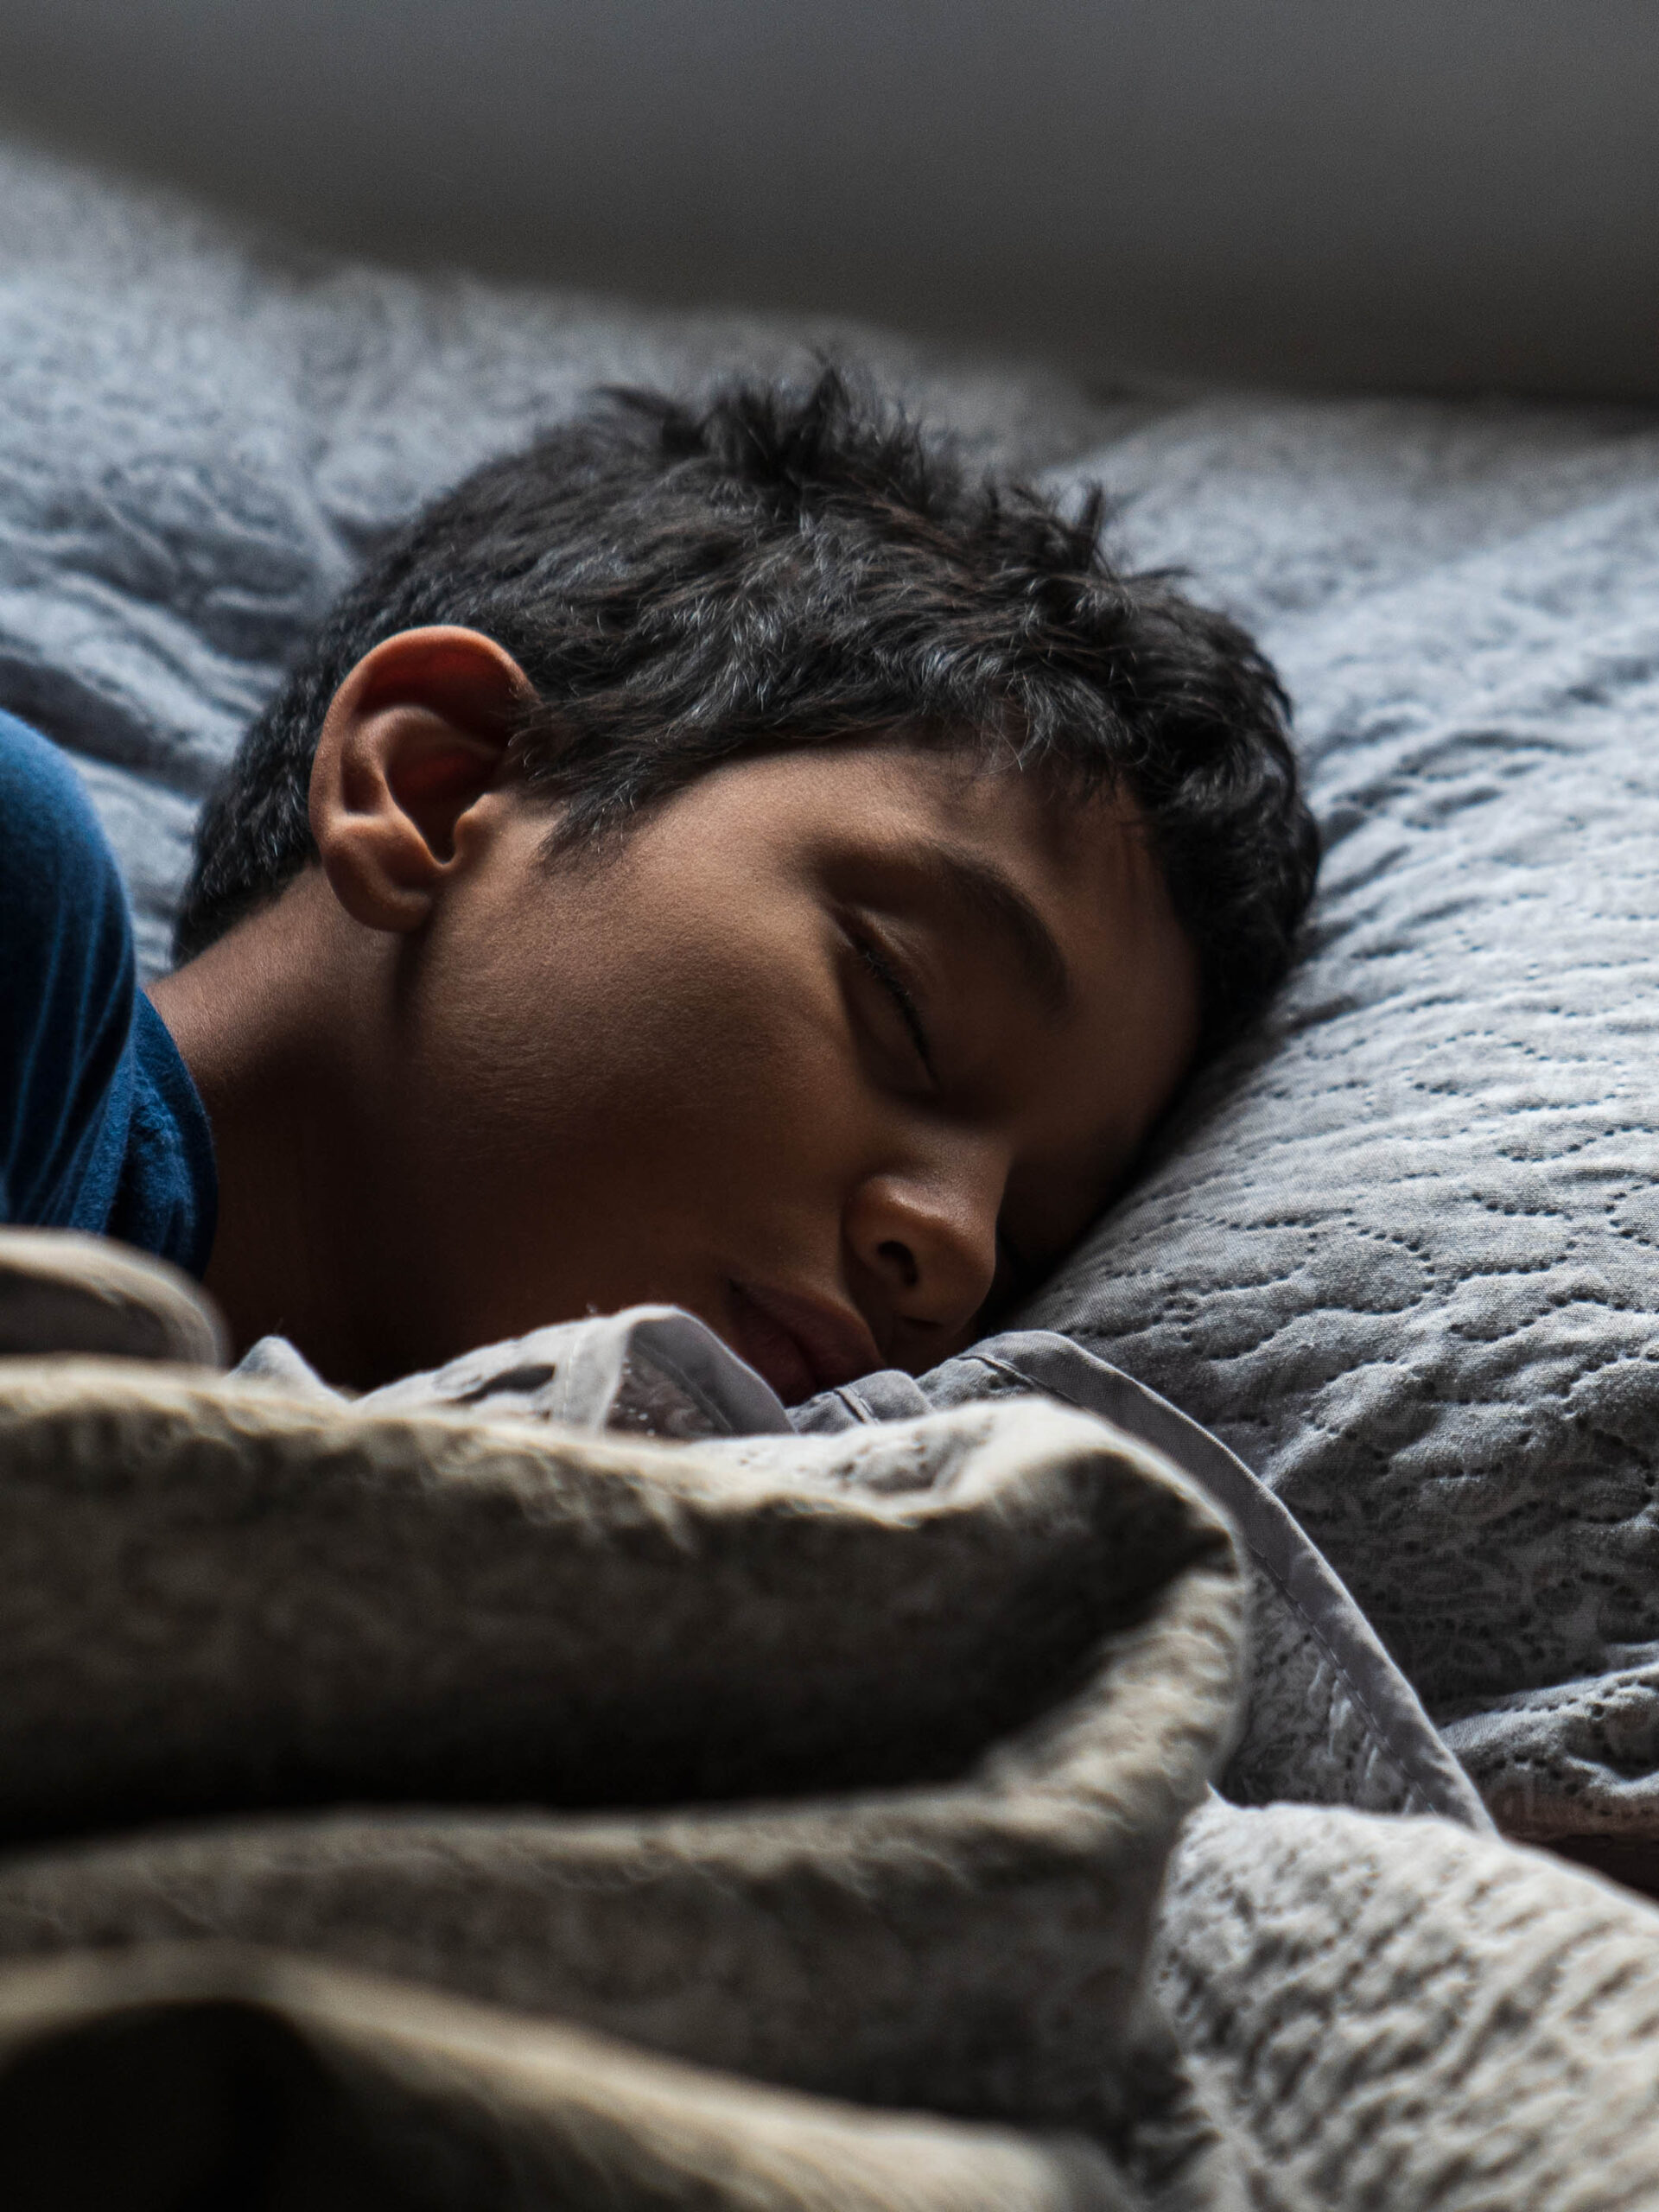 A Hispanic Young Sick Boy is Sleeping on His Bed with His Head on The Pillow Early in The Morning at His House. Copy Space